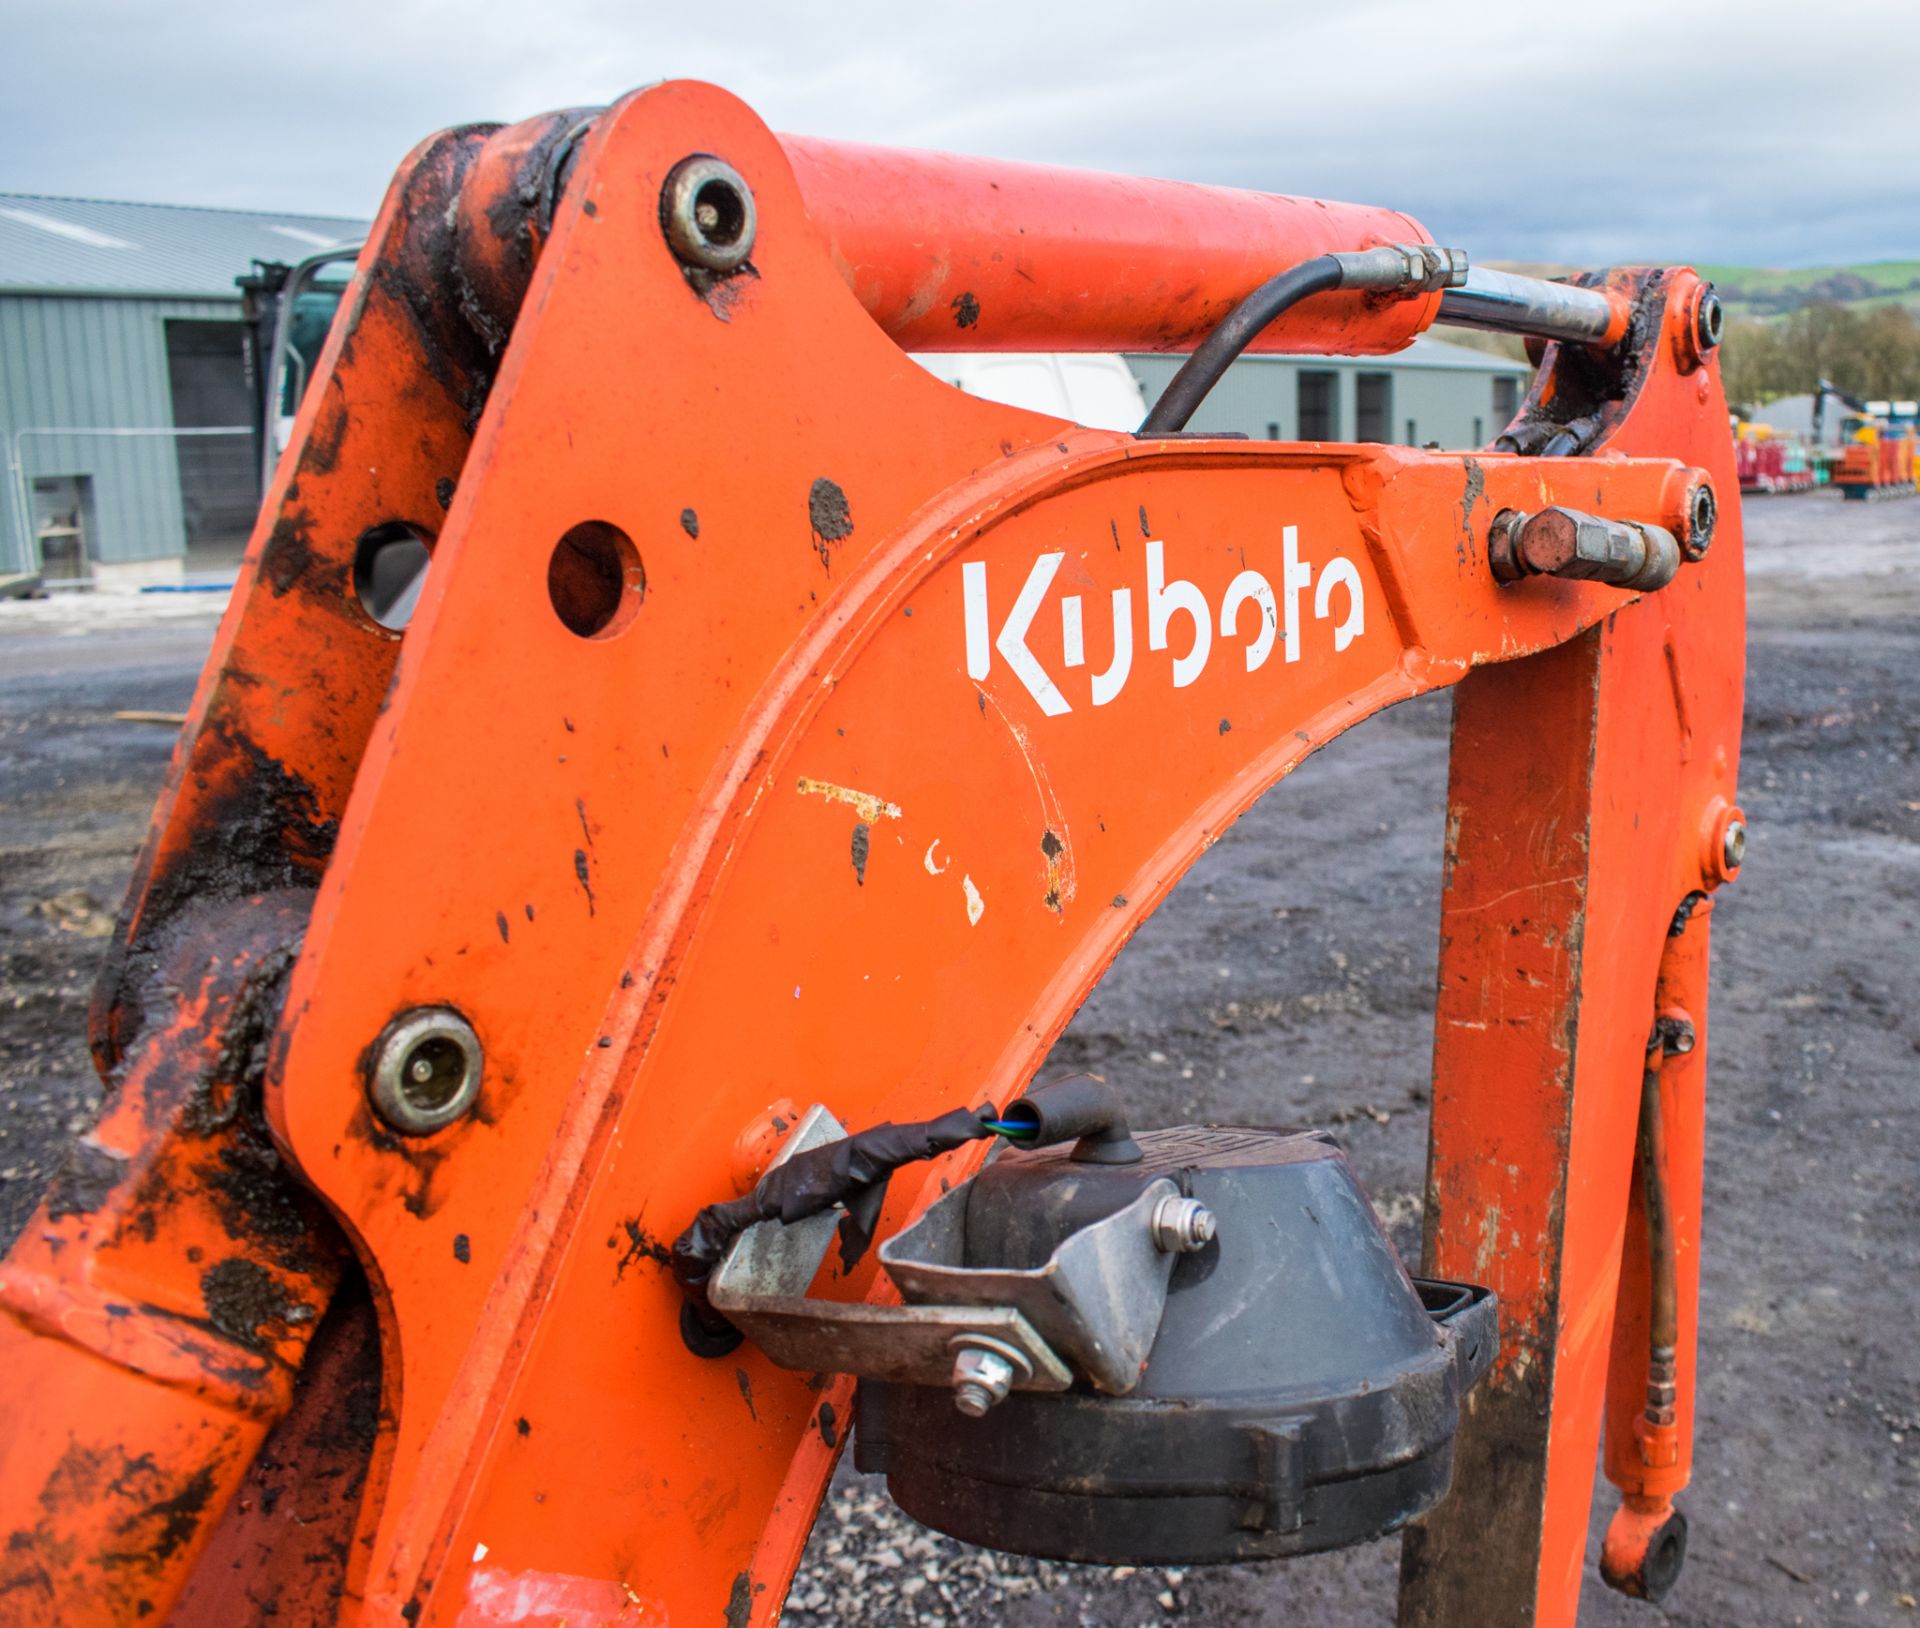 Kubota K008-3 0.8 tonne rubber tracked micro excavator Year: 2011 S/N: 22391   EXC111 Recorded - Image 11 of 16